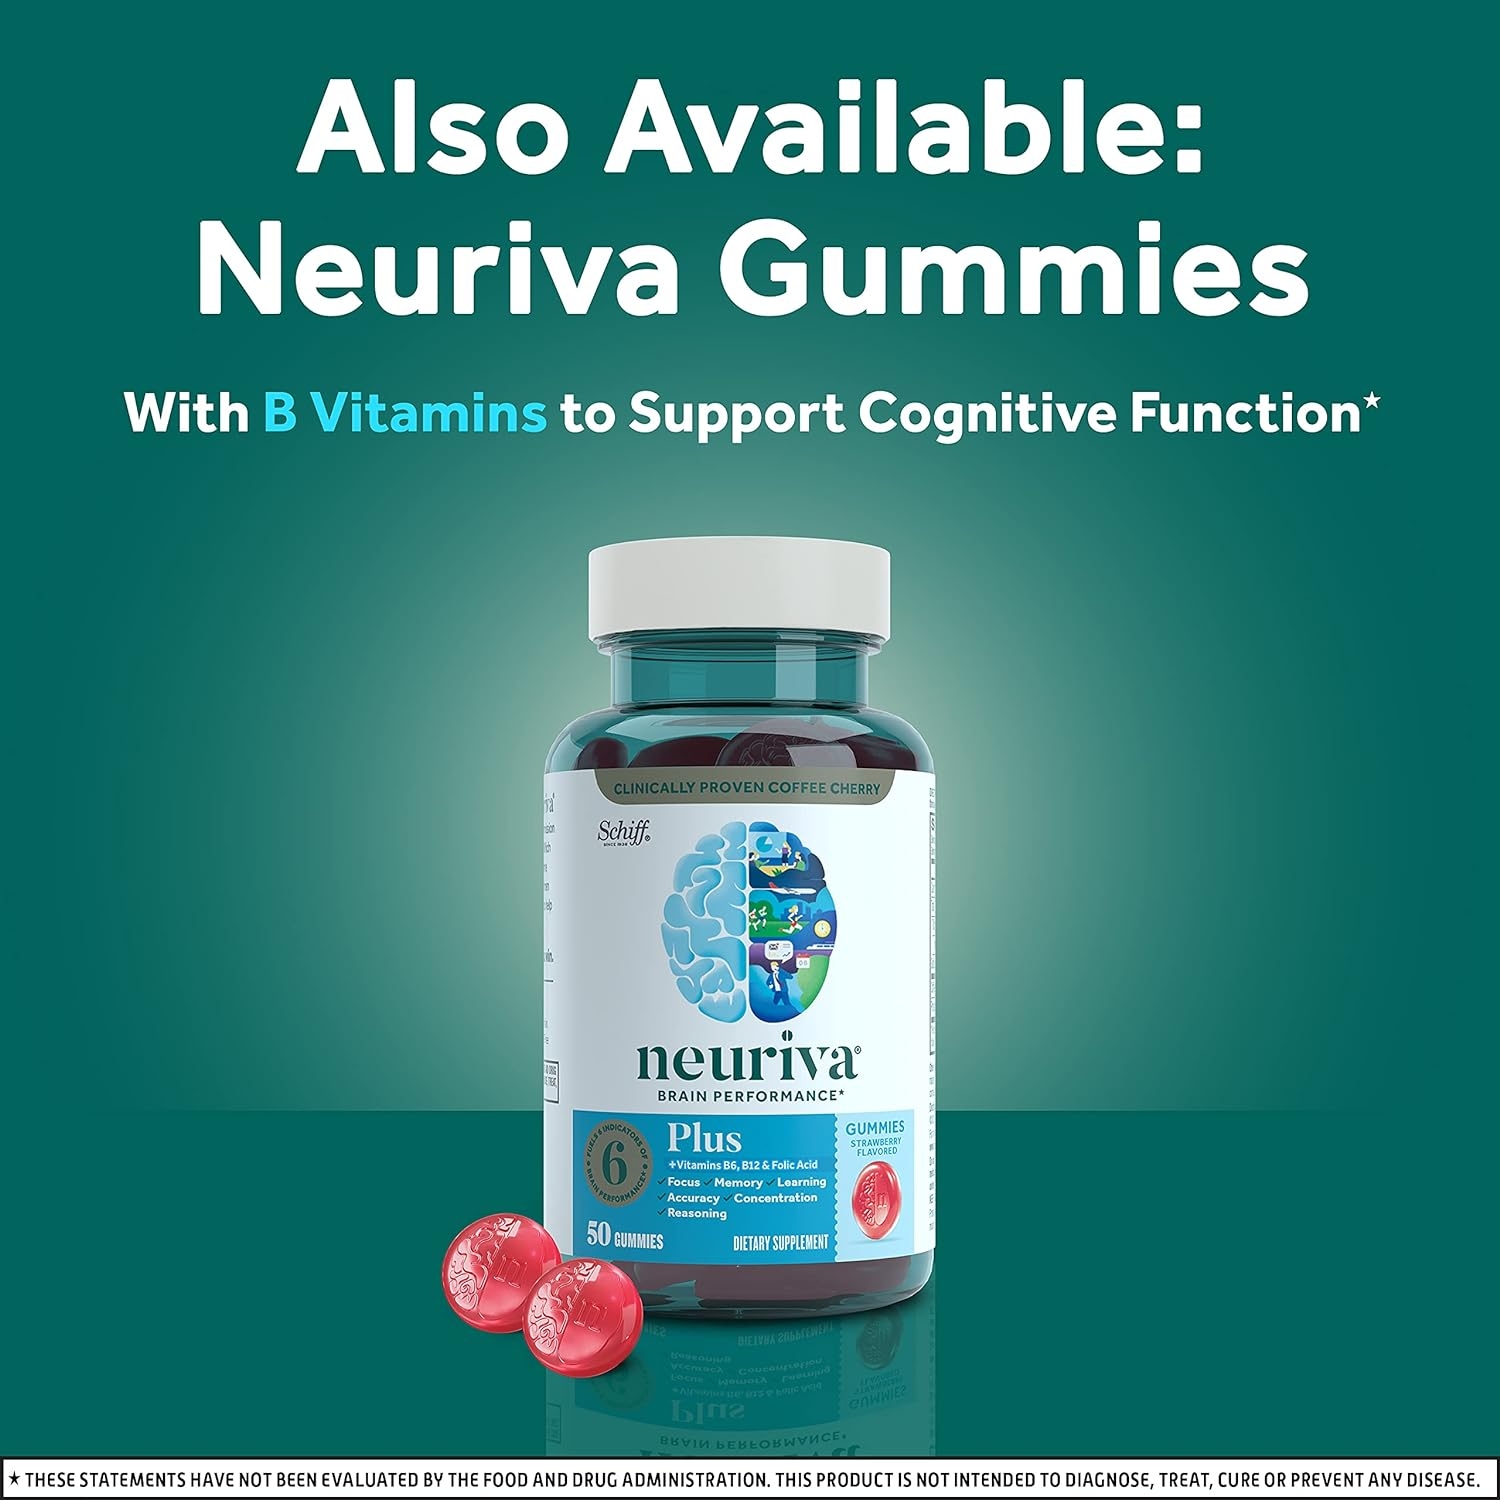 Nootropic Brain Support Supplement - NEURIVA Plus Capsules (30ct) Phosphatidylserine, B6, B12, Folic Acid - Supports Focus, Memory, Learning, Accuracy, Concentration & Reasoning (Pack of 2)